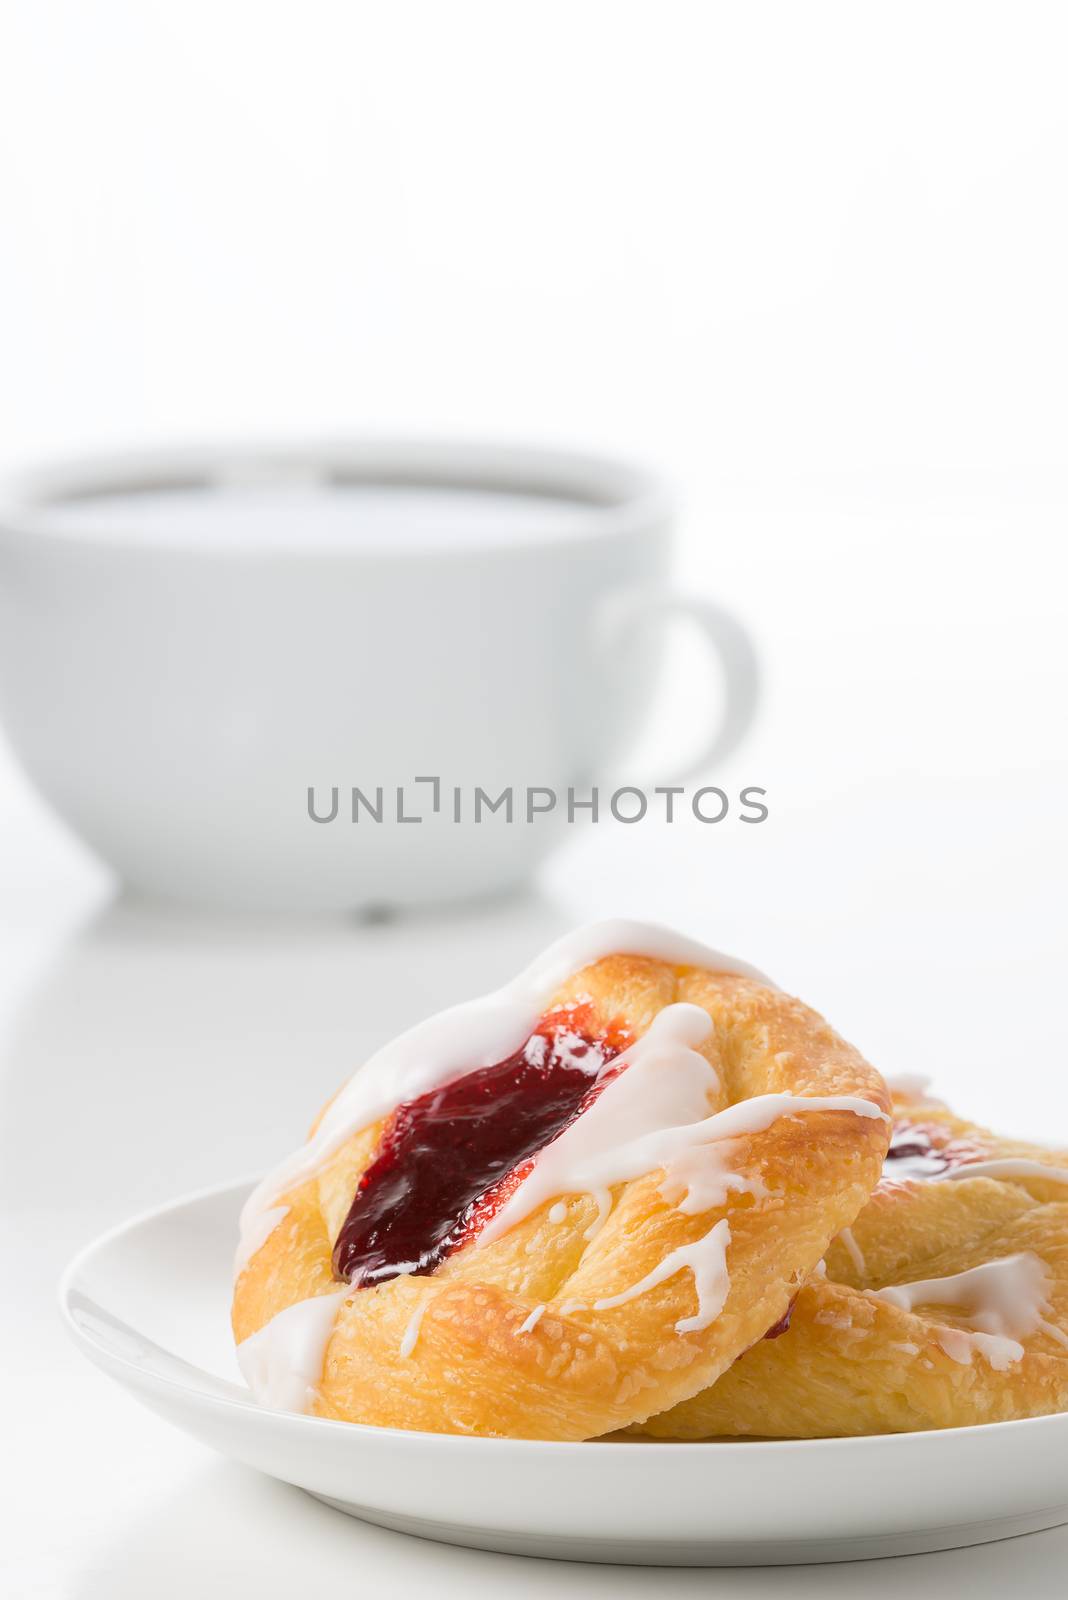 Fresh raspberry danish with coffee in the background.